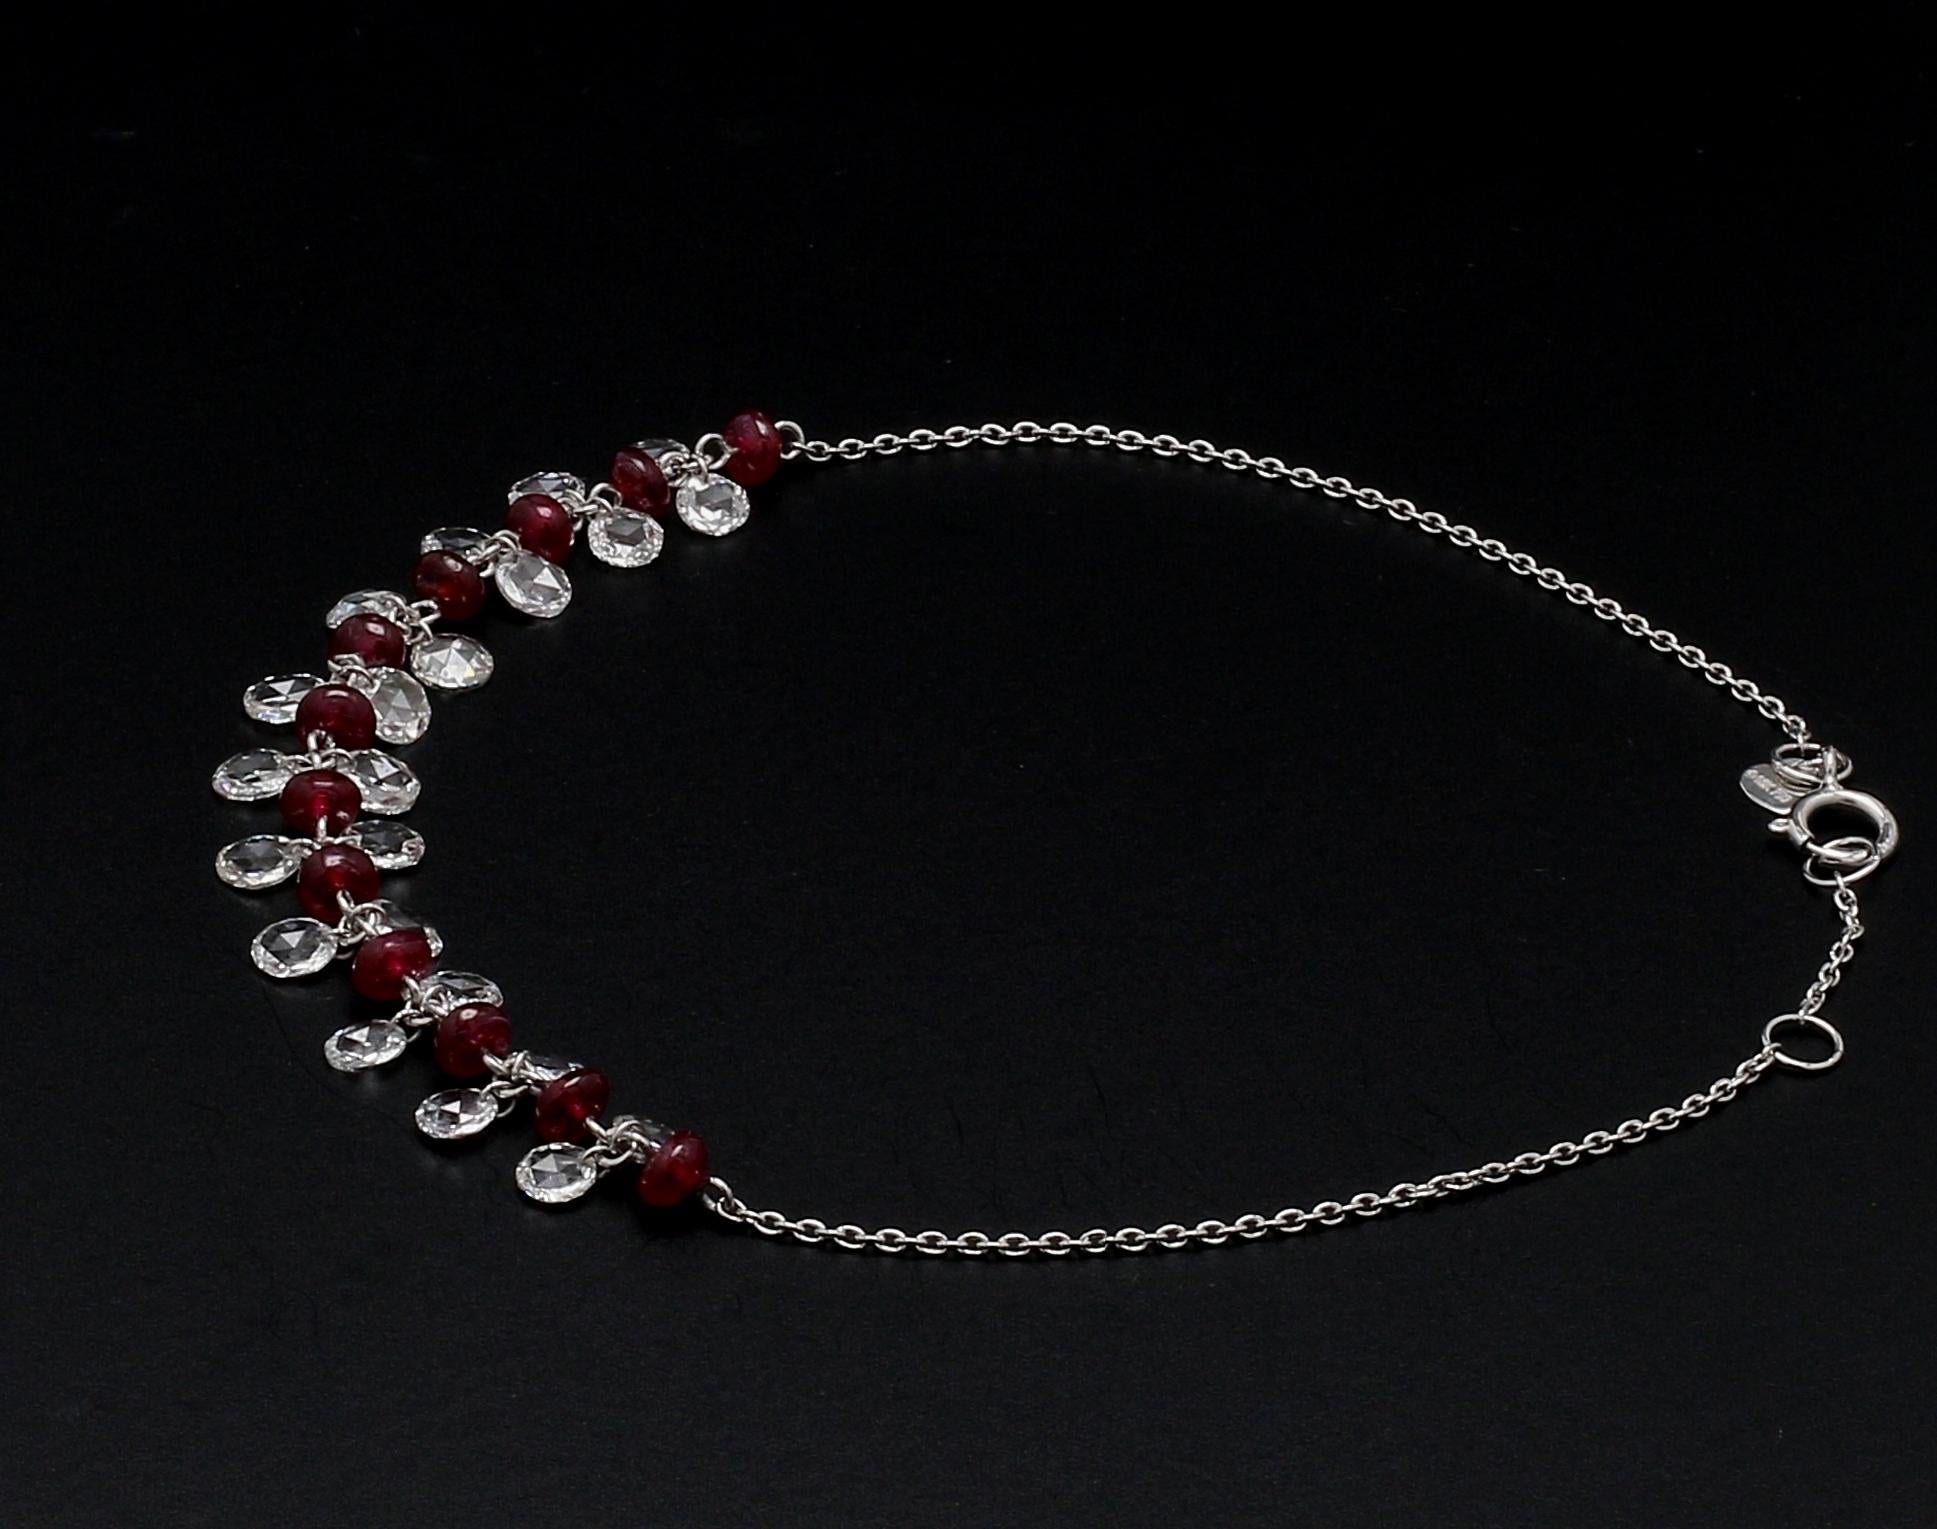 Panim Rose Cut Diamond And Ruby Dangling Bracelet in 18 Karat White Gold

Our dangling rose-cut diamond bracelet is extremely wearable. Its versatility and classic design make it a great accompaniment to various occasions. Beautifully made with